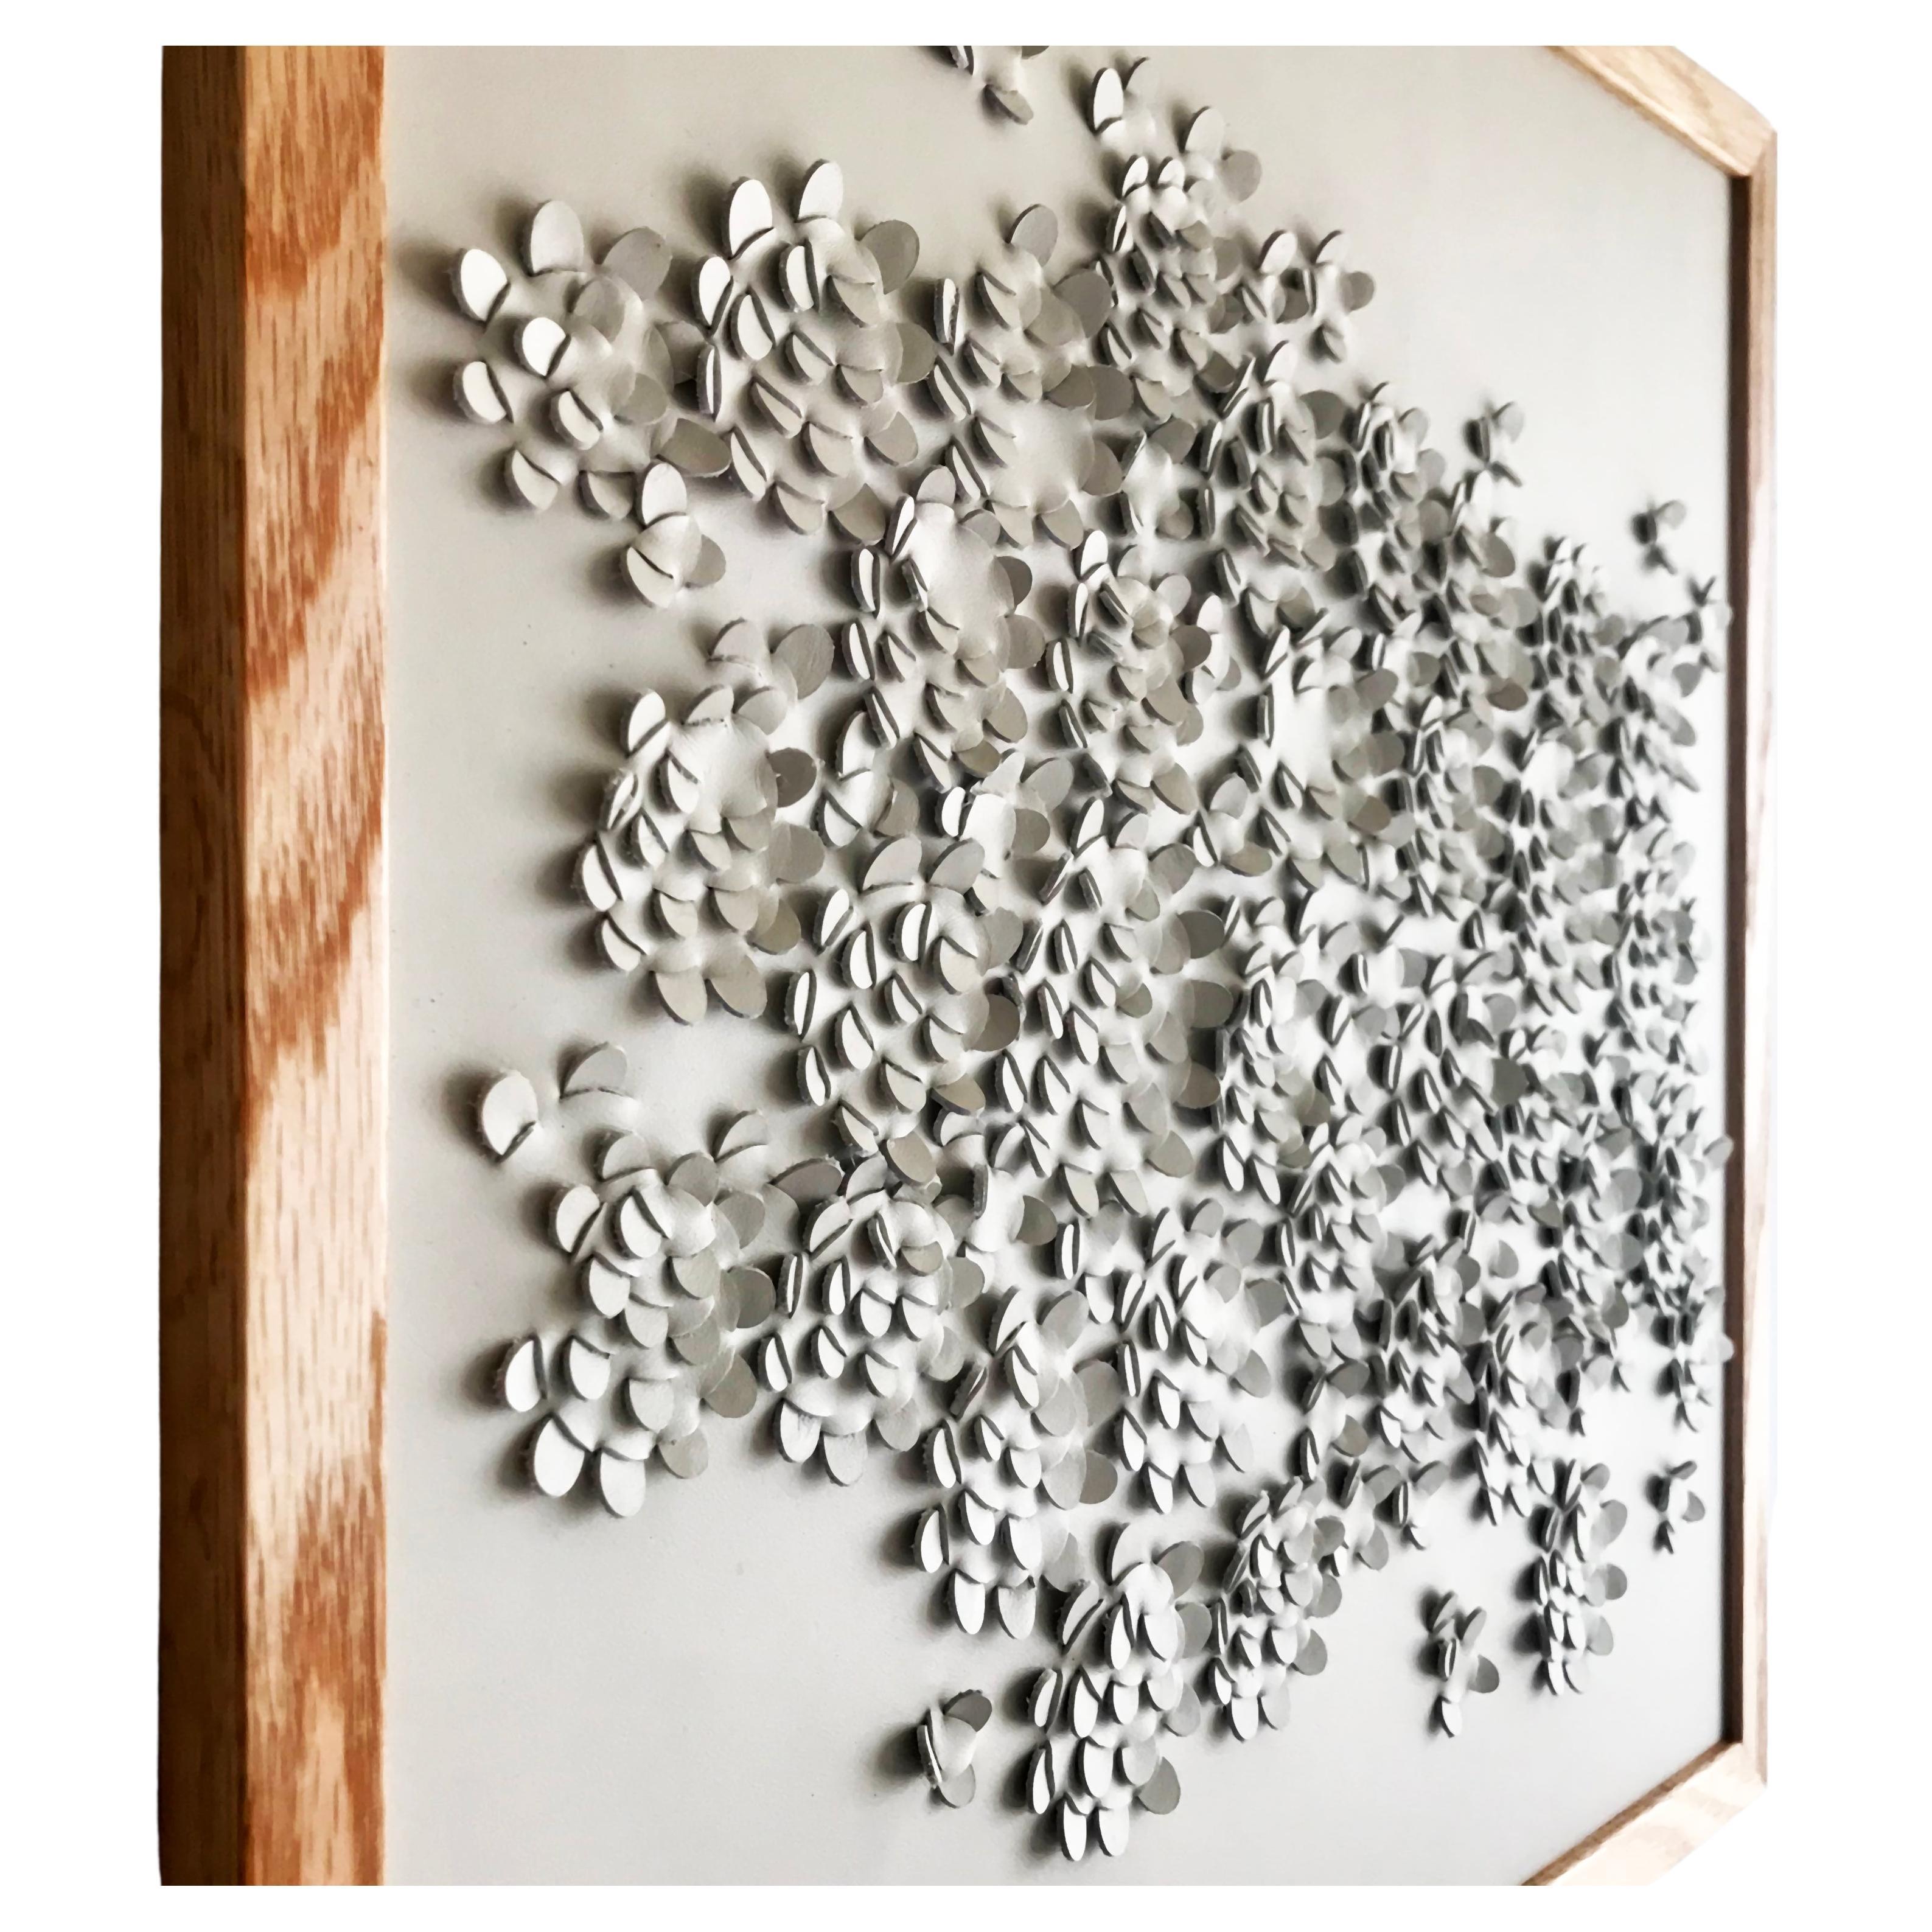 Wild flower:

A piece of 3D sculptural wall art designed and made from two layers of cream leather woven together by Louise Heighes.
Measurements are 19.5 x 19.5 inches or 49 x 49 cm

This piece is inspired by the striking yellow wildflower and